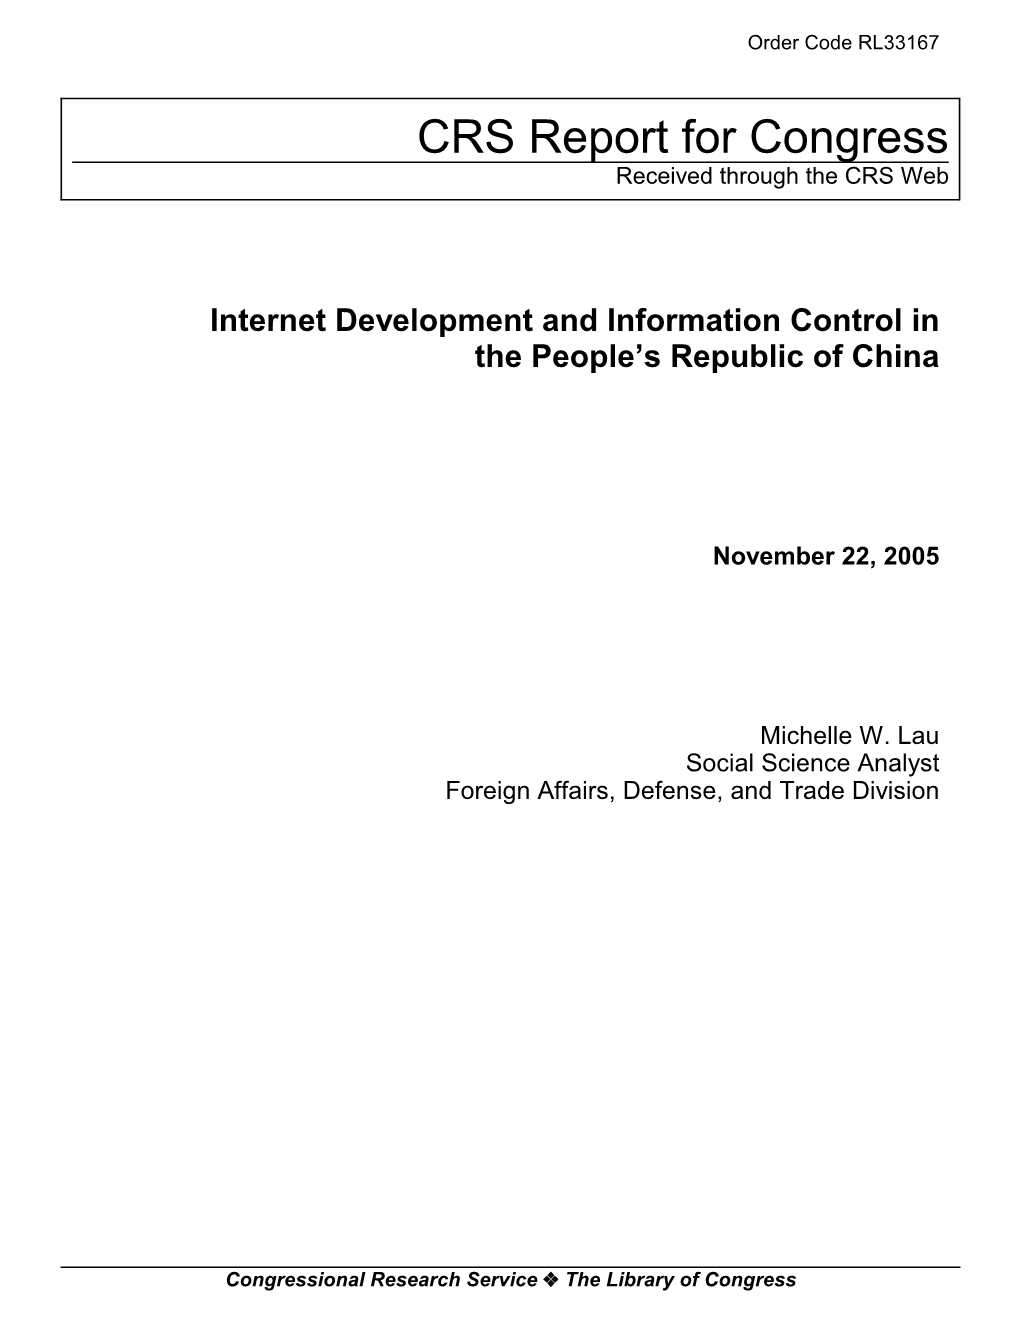 Internet Development and Information Control in the People's Republic Of